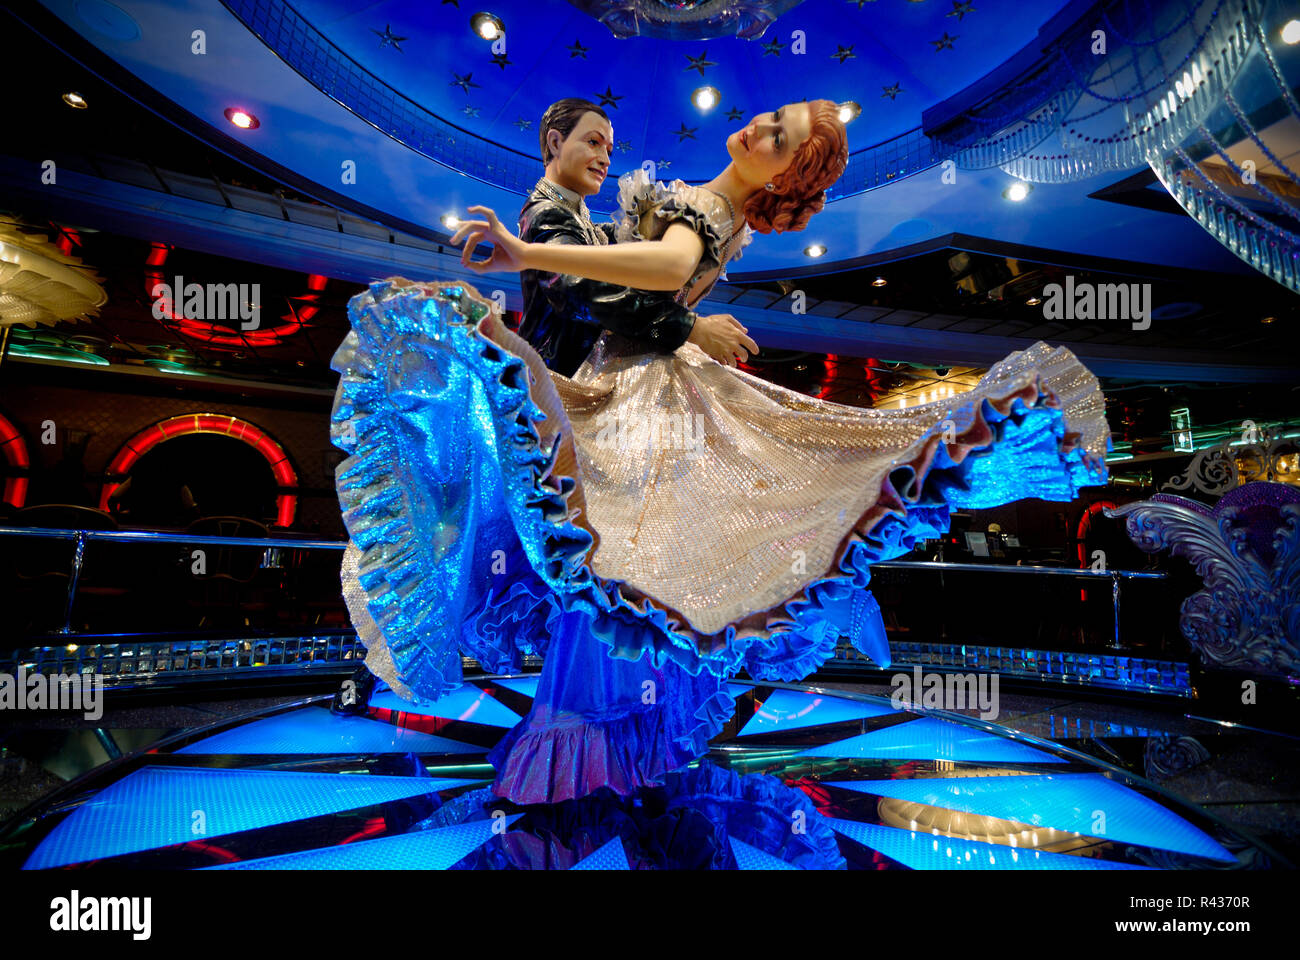 This statue of two ballroom dancers is located in the casino on the Royal Caribbean cruise ship Adventure of the Seas. Stock Photo